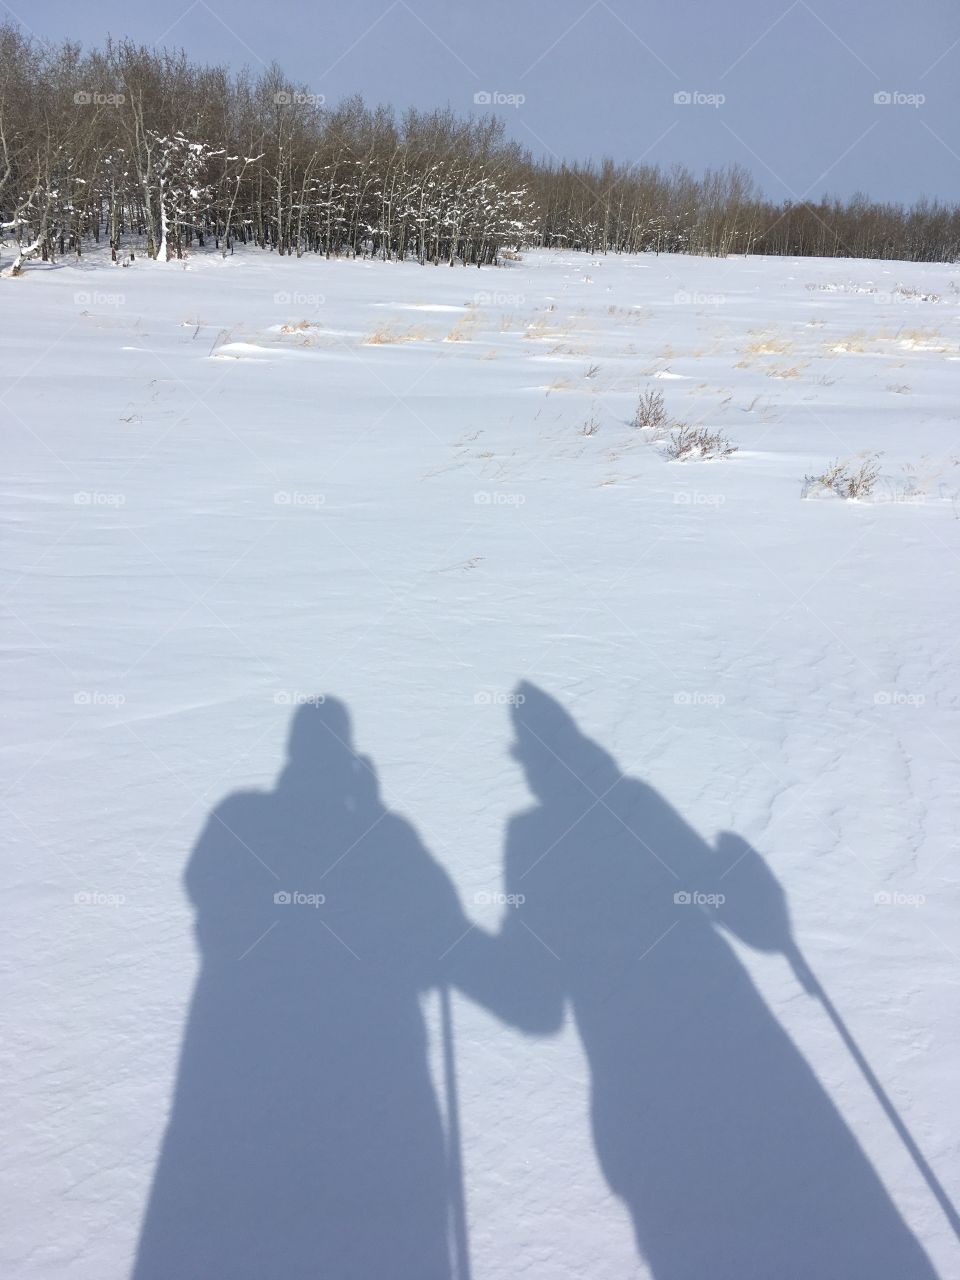 Snowshoeing shadows together 